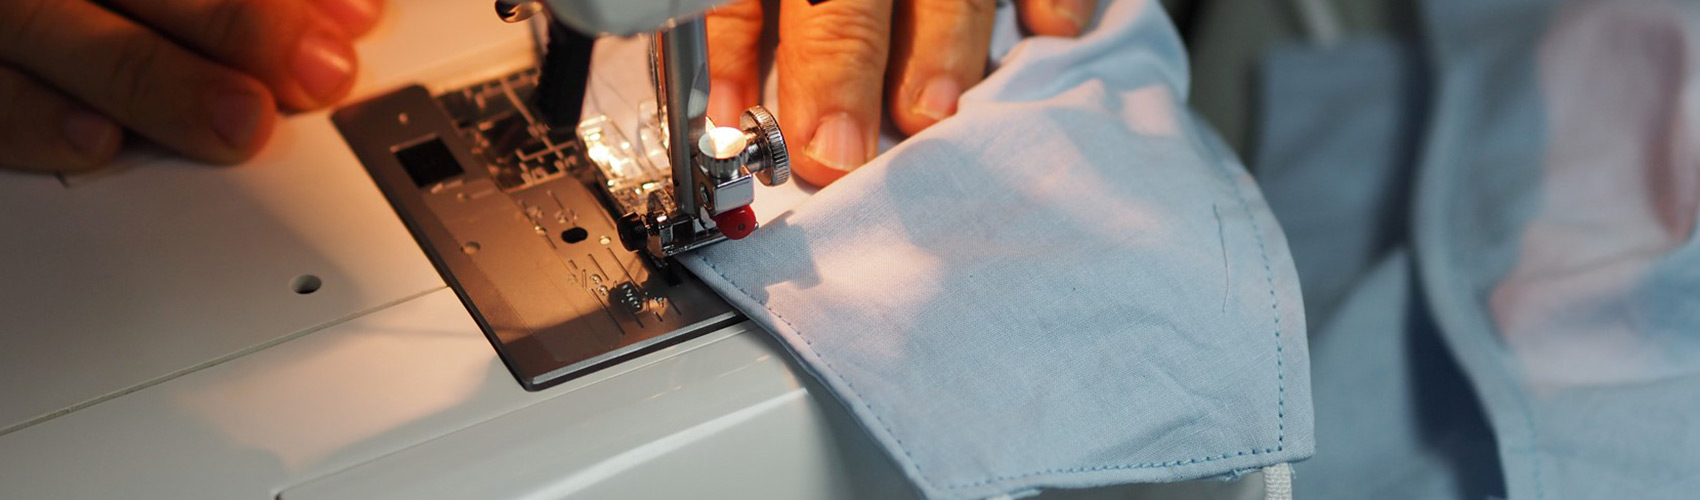 Threading the needle: A refugee uses his tailoring skills to serve his community Banner Image